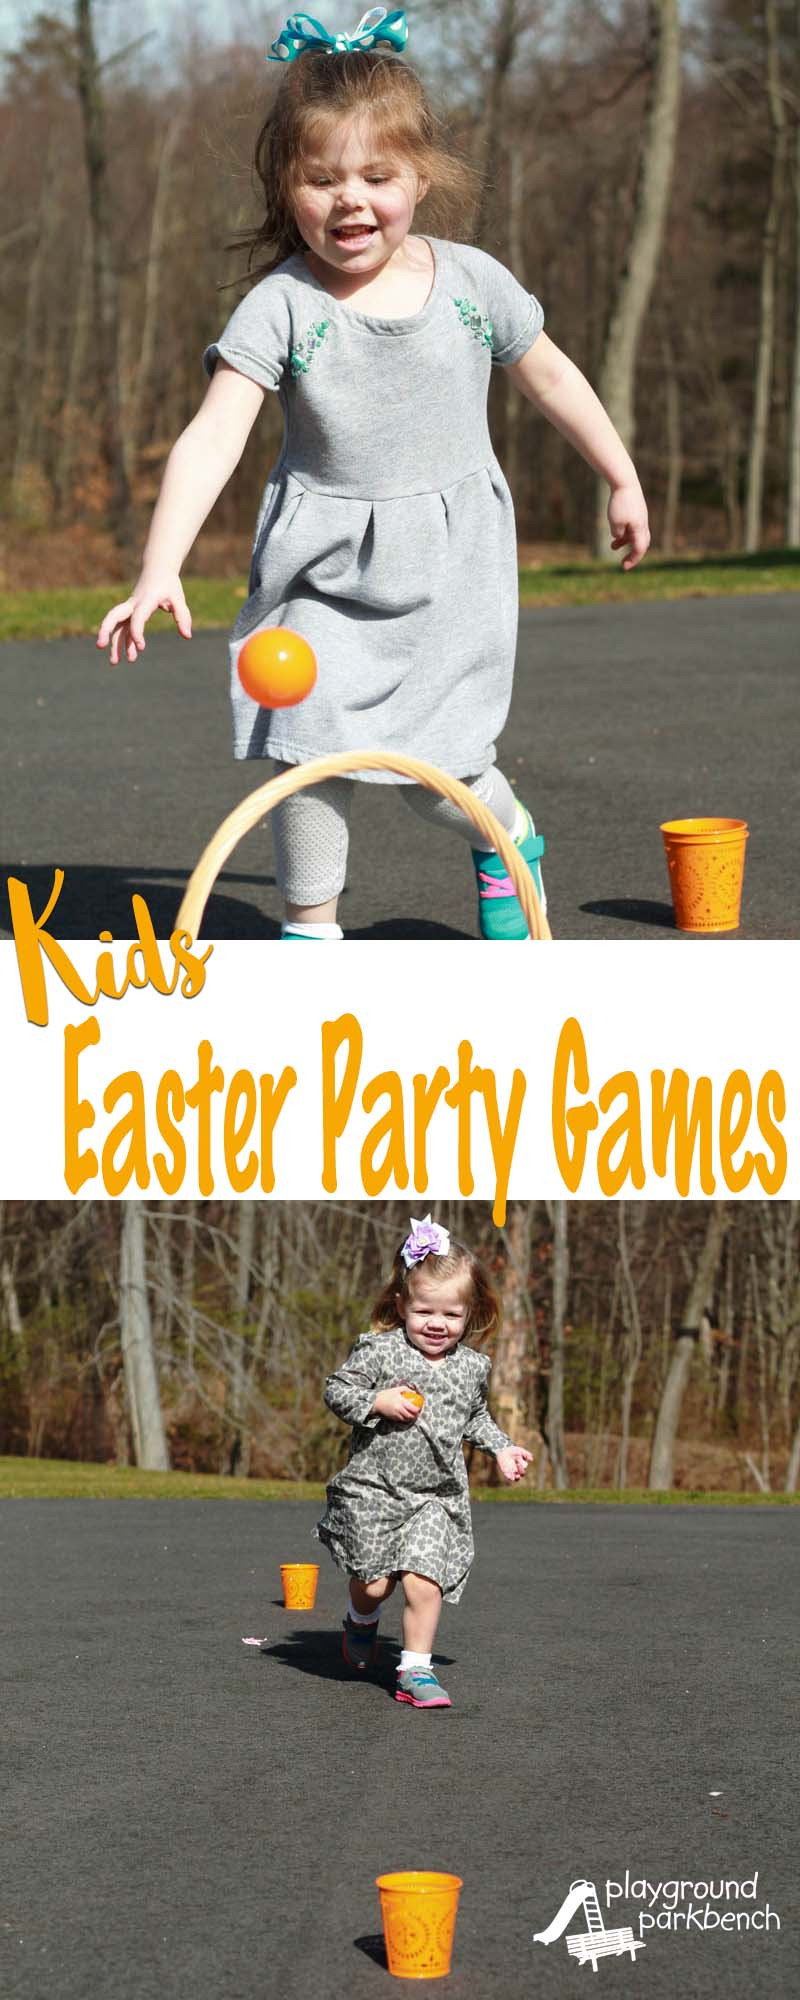 Easter Party Kids Games
 Kids Easter Party Games